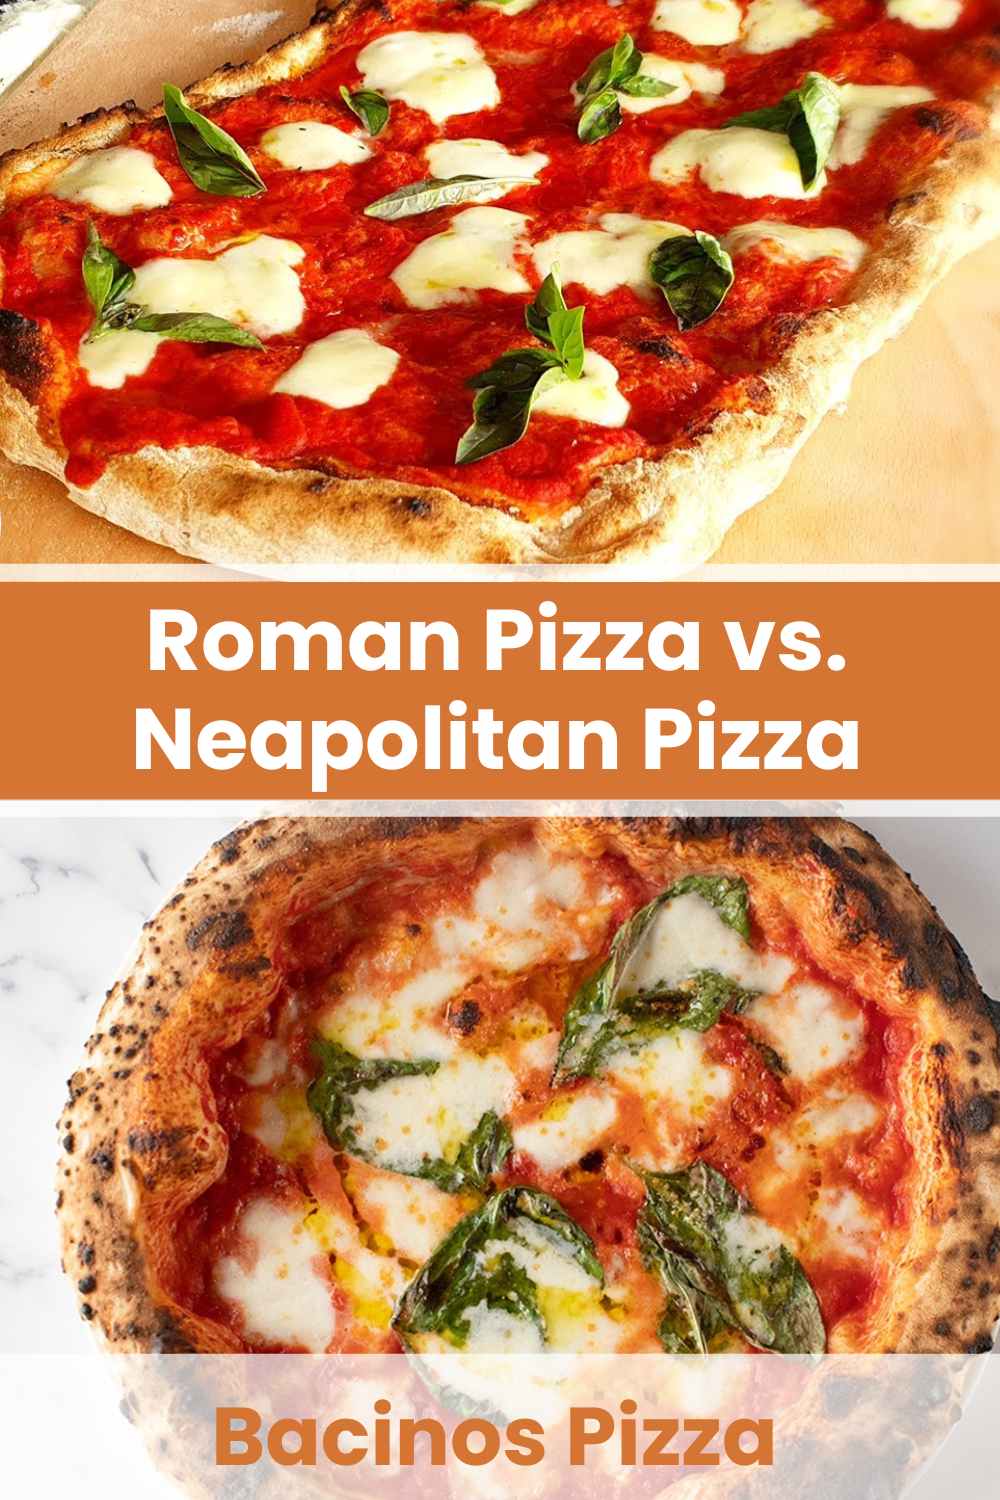 different between Roman Pizza and Neapolitan Pizza